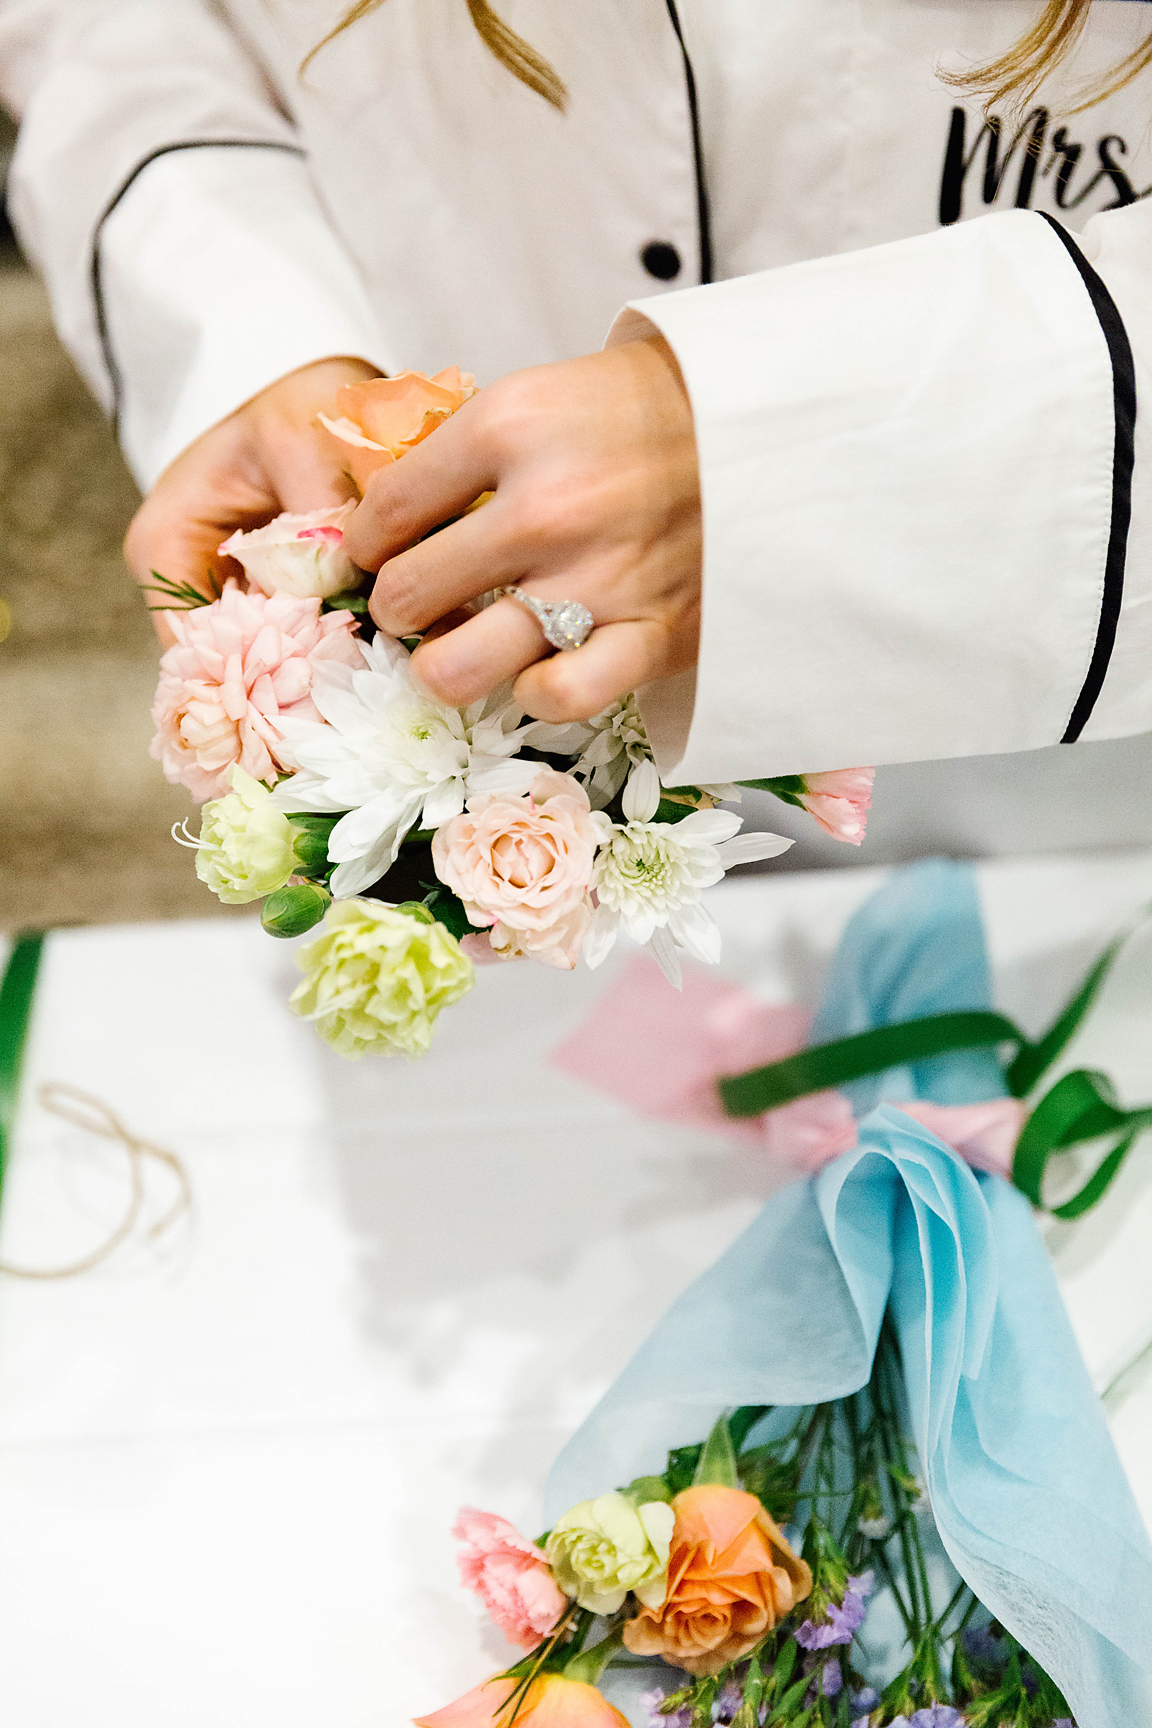 close up of hands arranging a posey of flowers